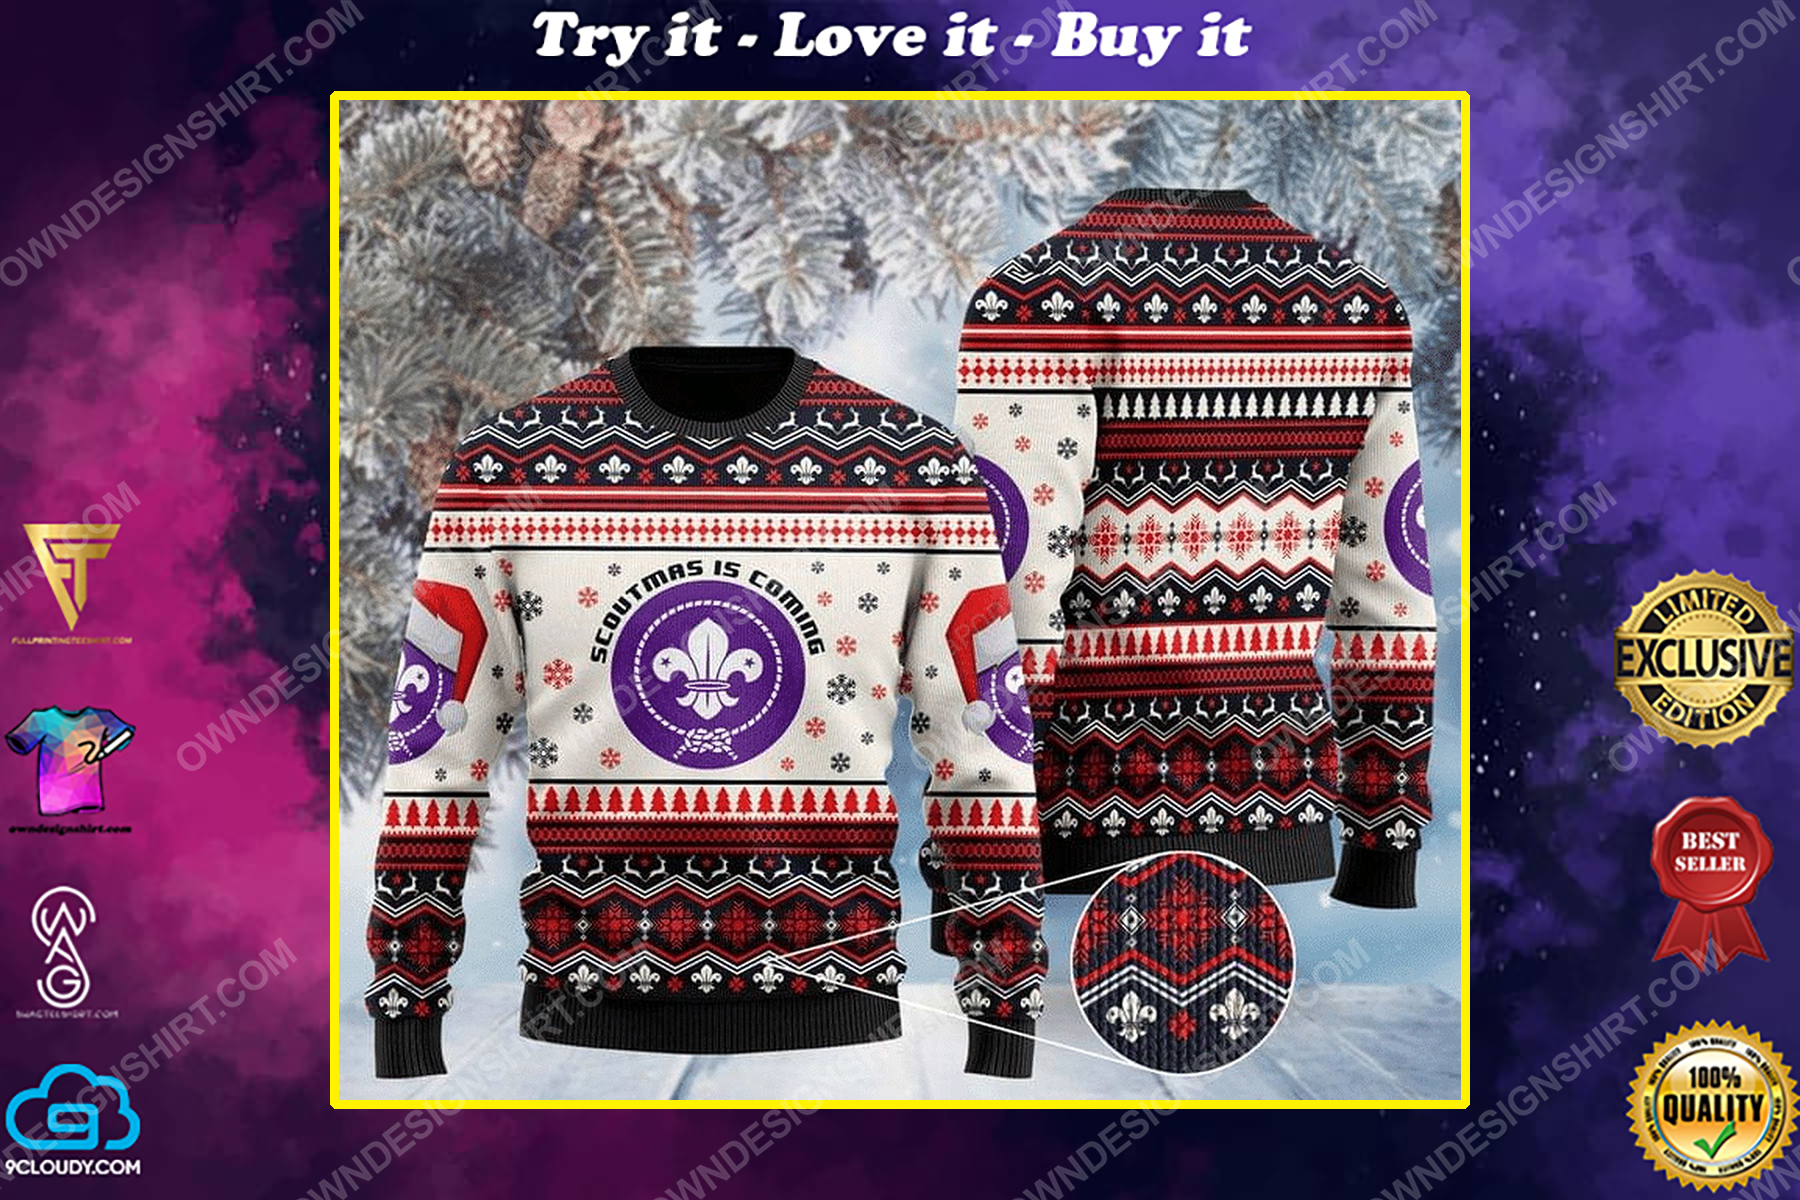 Scoutmas is coming full print ugly christmas sweater